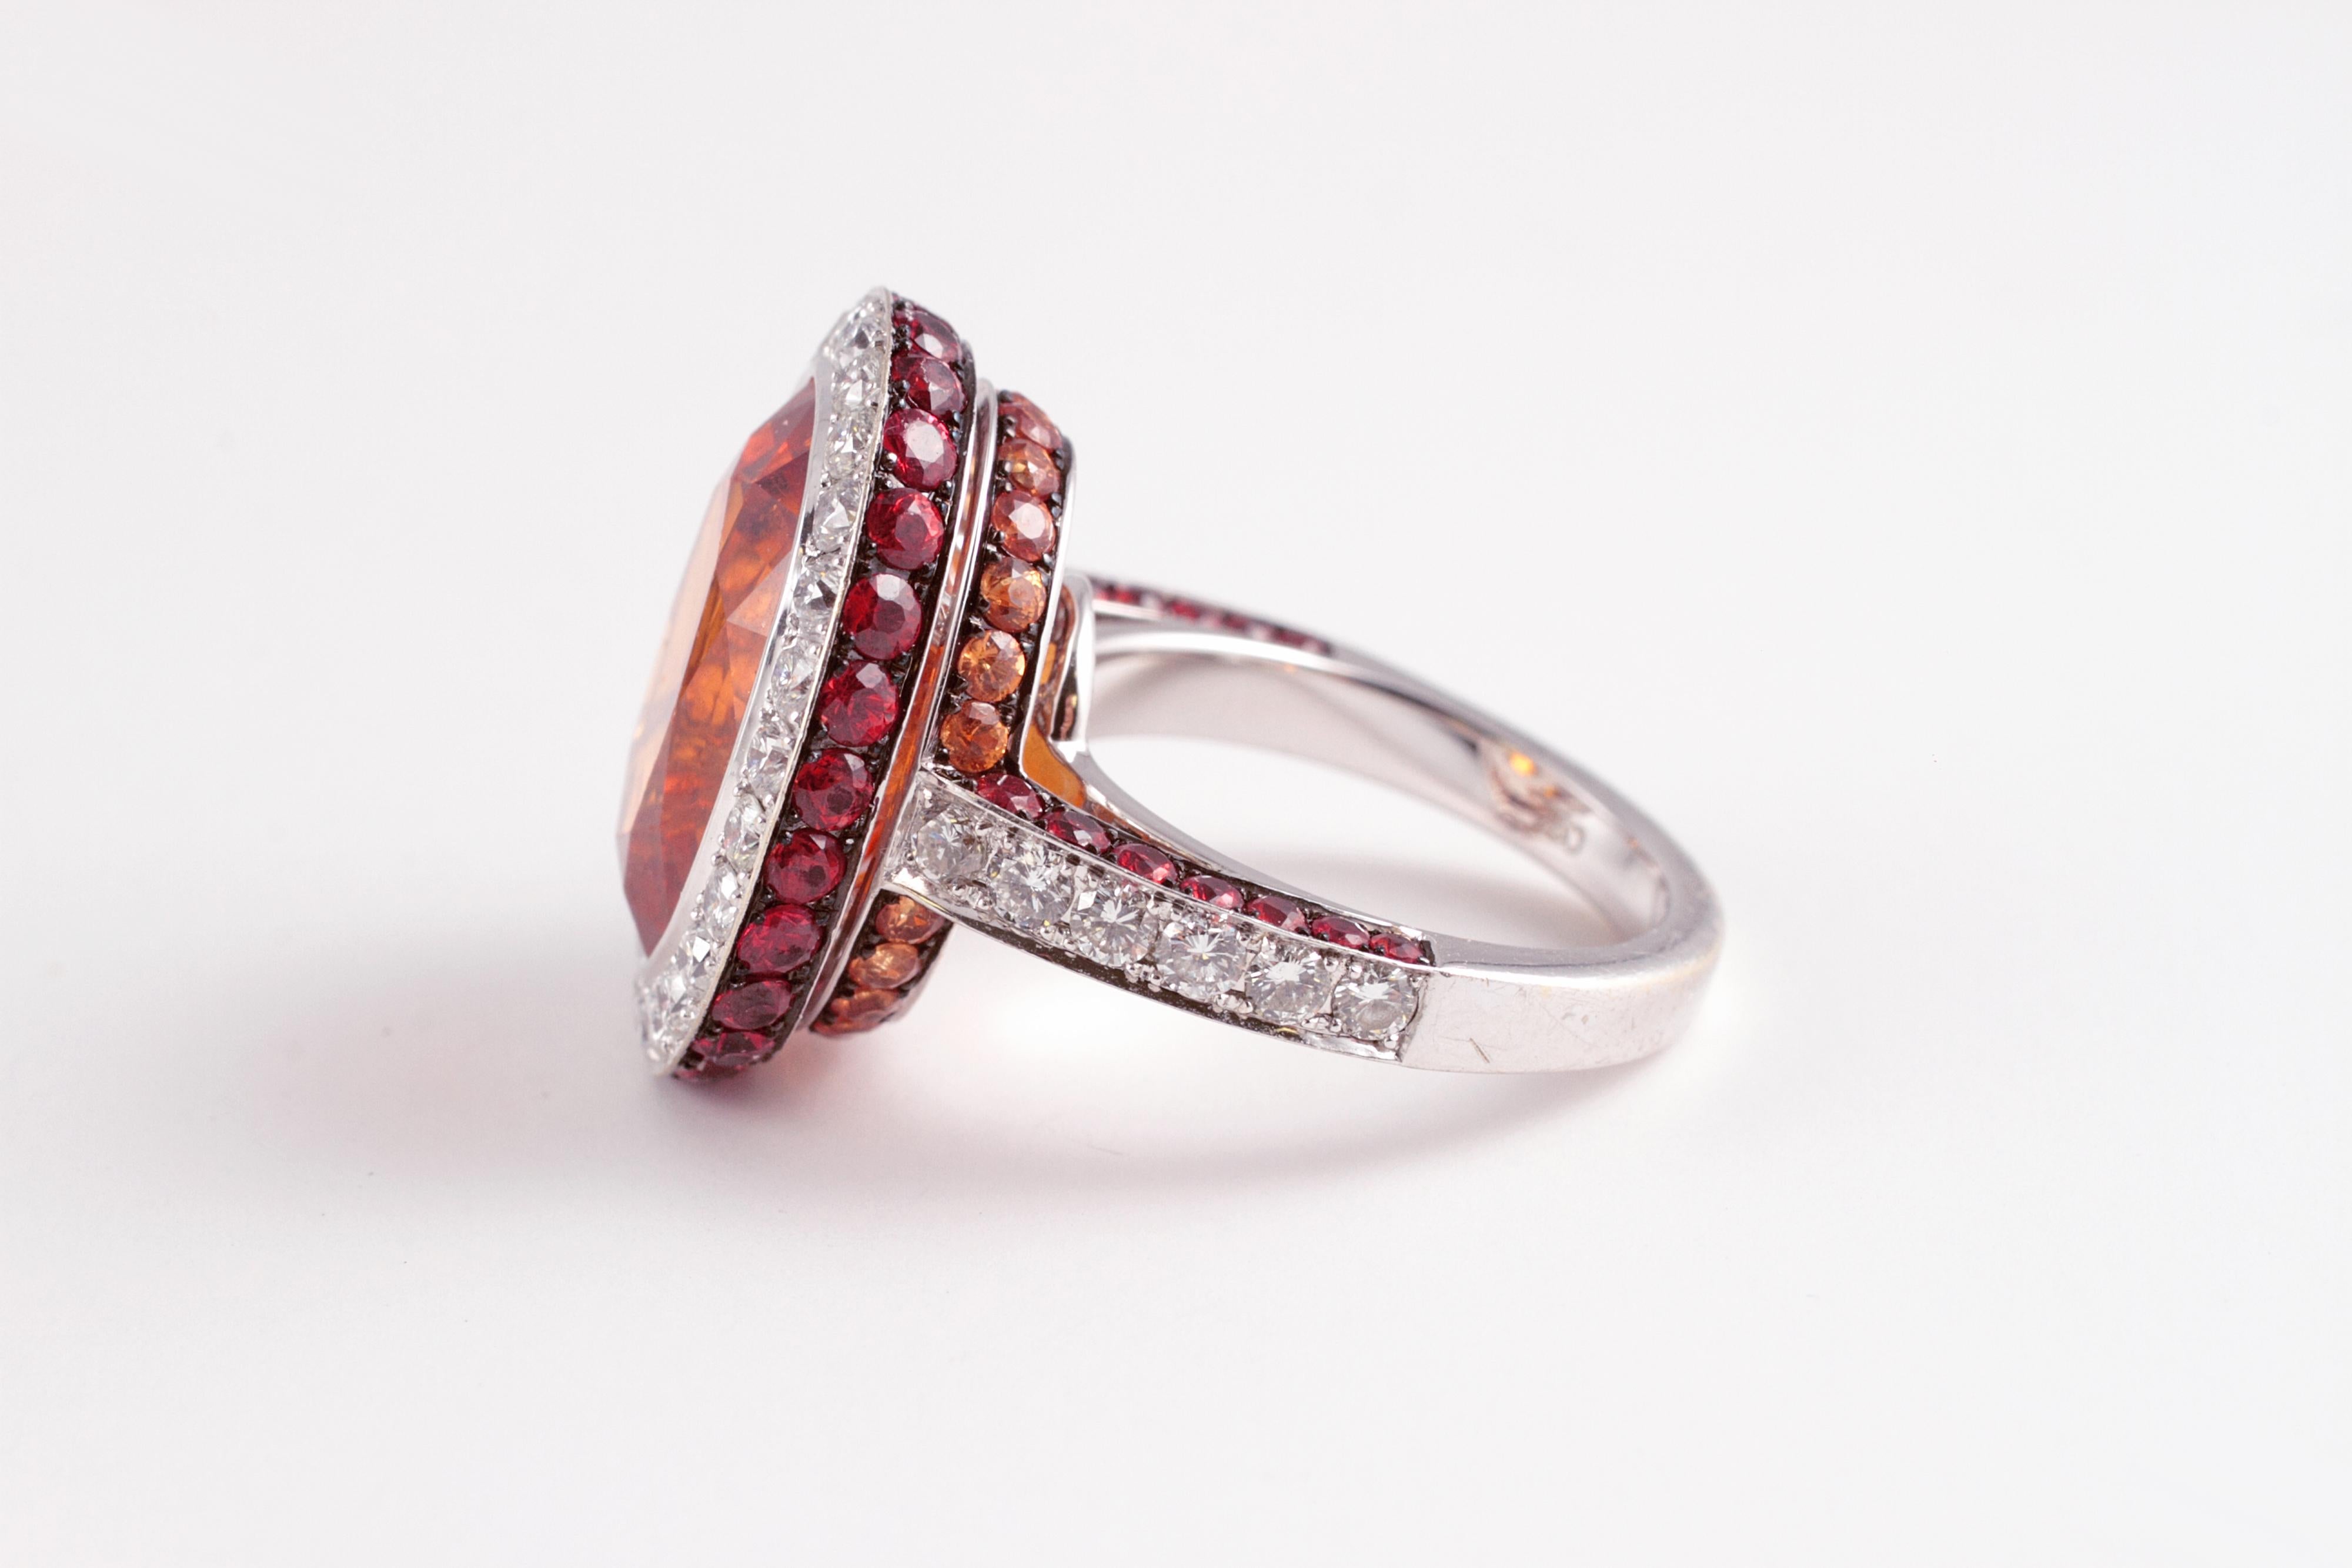 Exquisite Mandarin garnet and diamond ring!  The 15.32 oval-shaped Mandarin garnet is bezel set and surrounded by 1.45 carats of diamonds, SI in clarity and G - H in color, along with 2.06 carats of red sapphires and 0.79 carats of orange sapphires,